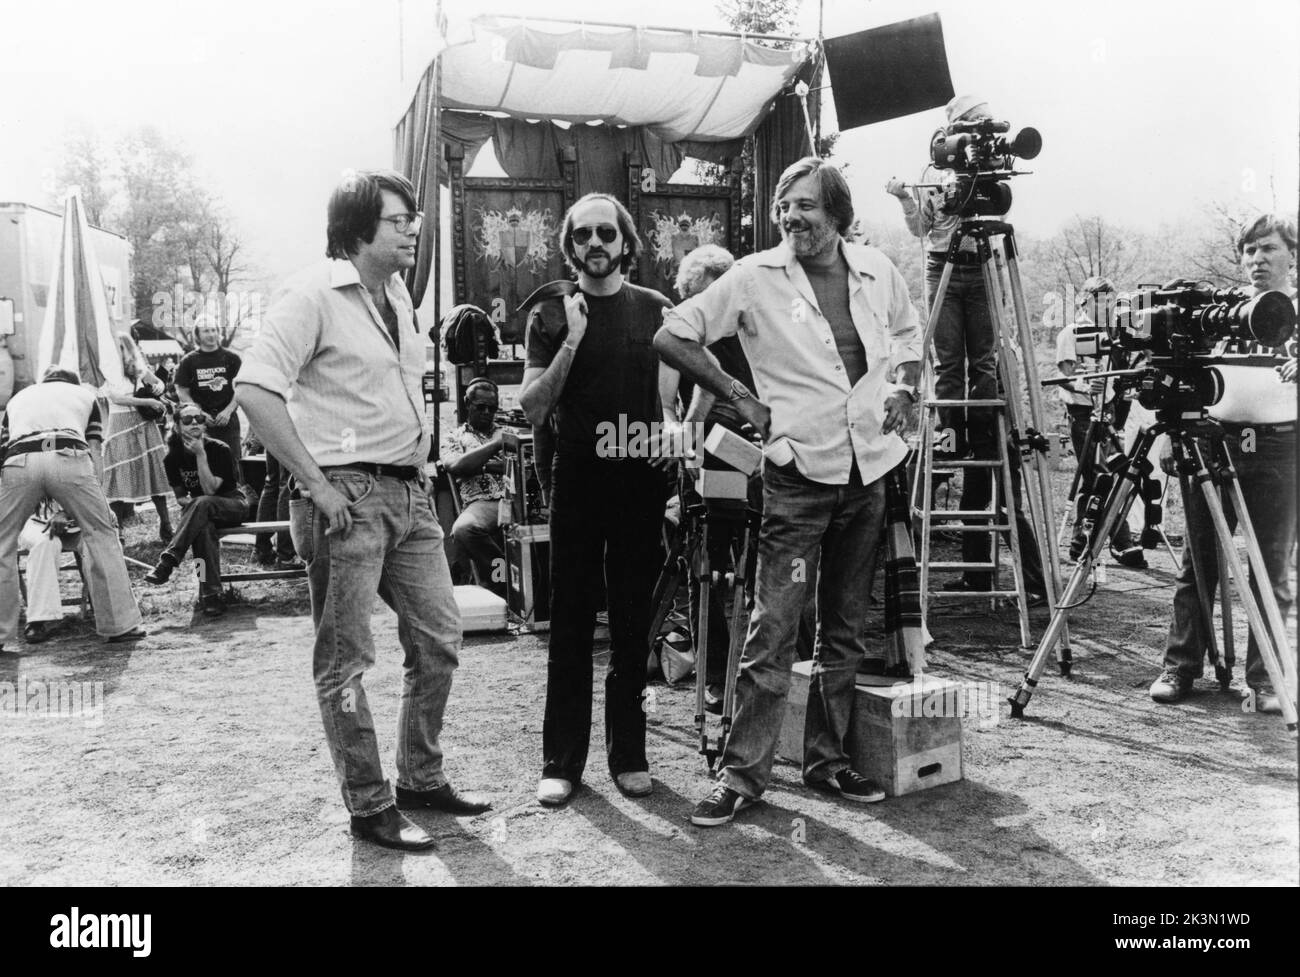 Writer / Author STEPHEN KING and Director GEORGE A. ROMERO with Movie / Film Crew on set location candid during filming of CREEPSHOW 1982 director GEORGE A. ROMERO original screenplay Stephen King United Film Distribution Company (UFDC) / Laurel-Show Inc. / Creepshow Films Inc. / Laurel Entertainment Inc. / Warner Bros. Stock Photo